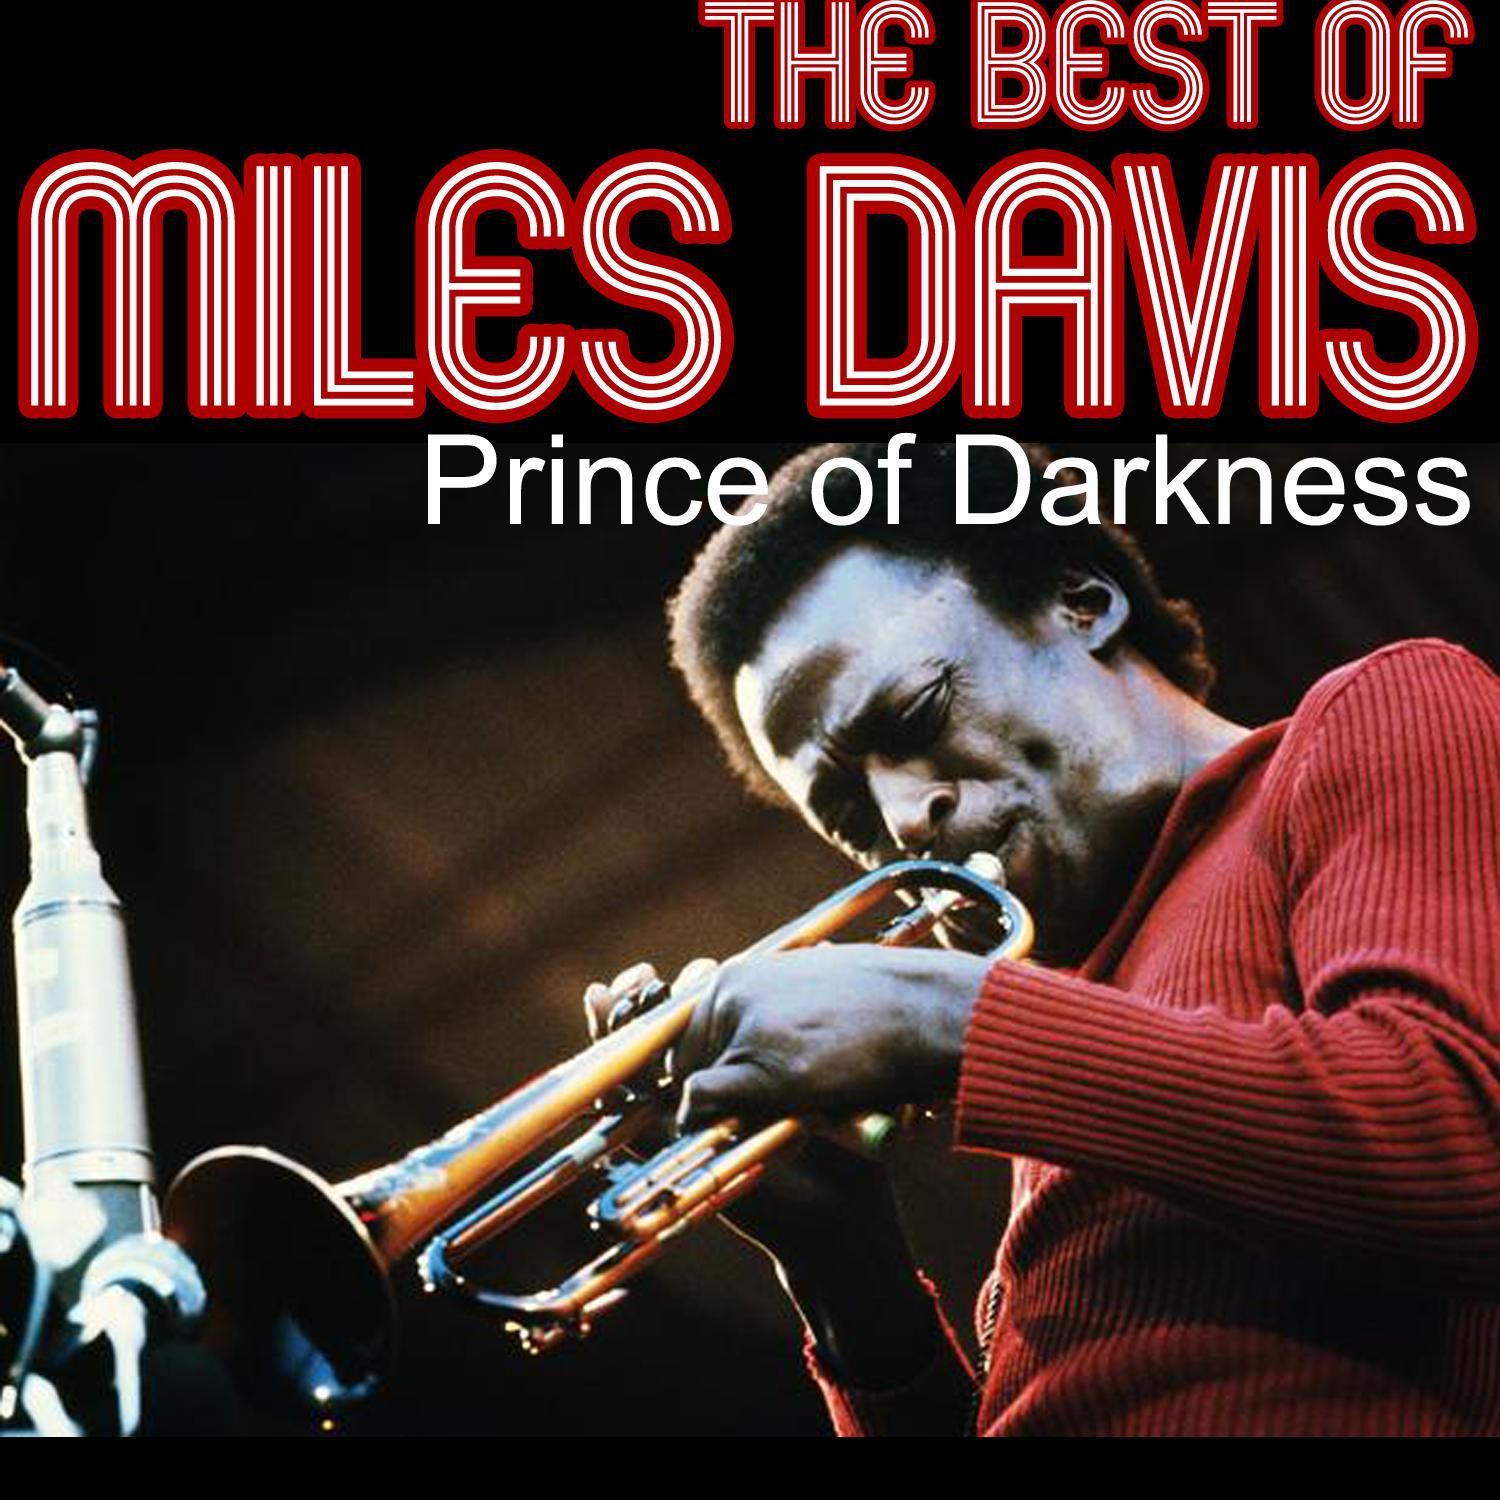 Prince of Darkness: The Best of Miles Davis